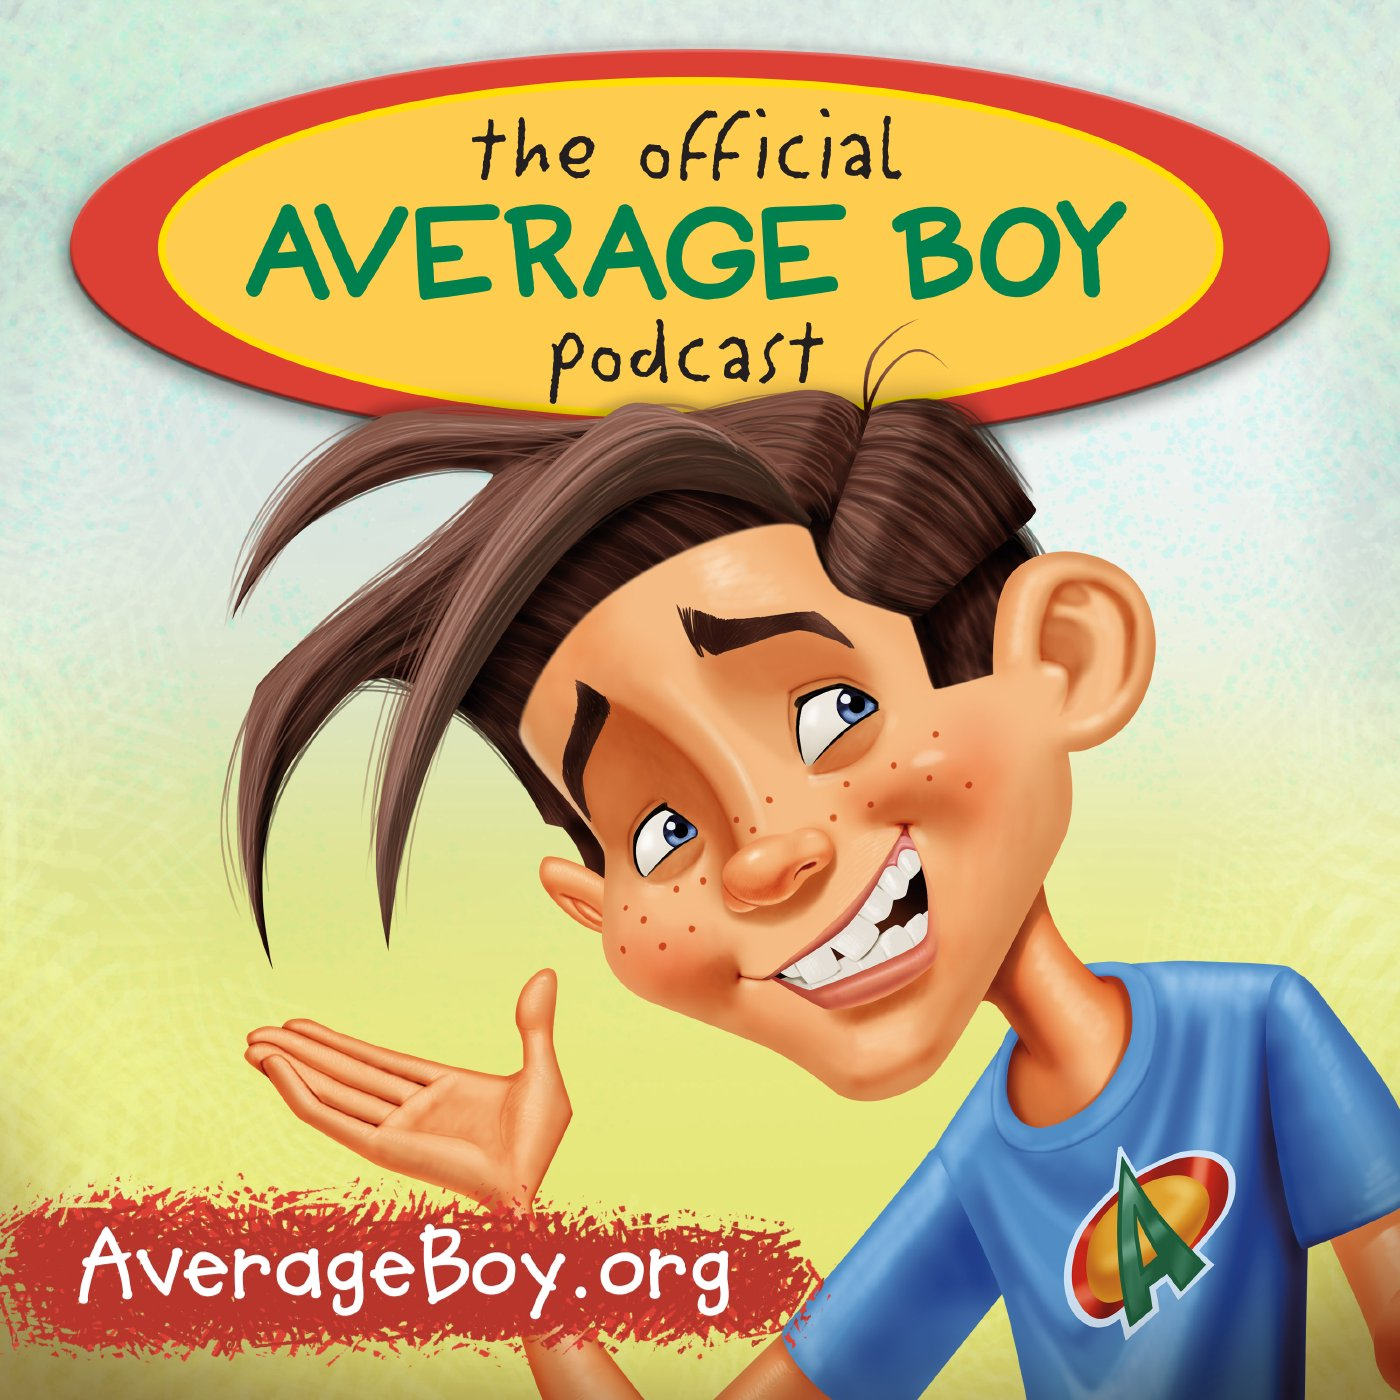 The Official Average Boy Podcast #26 on Honesty